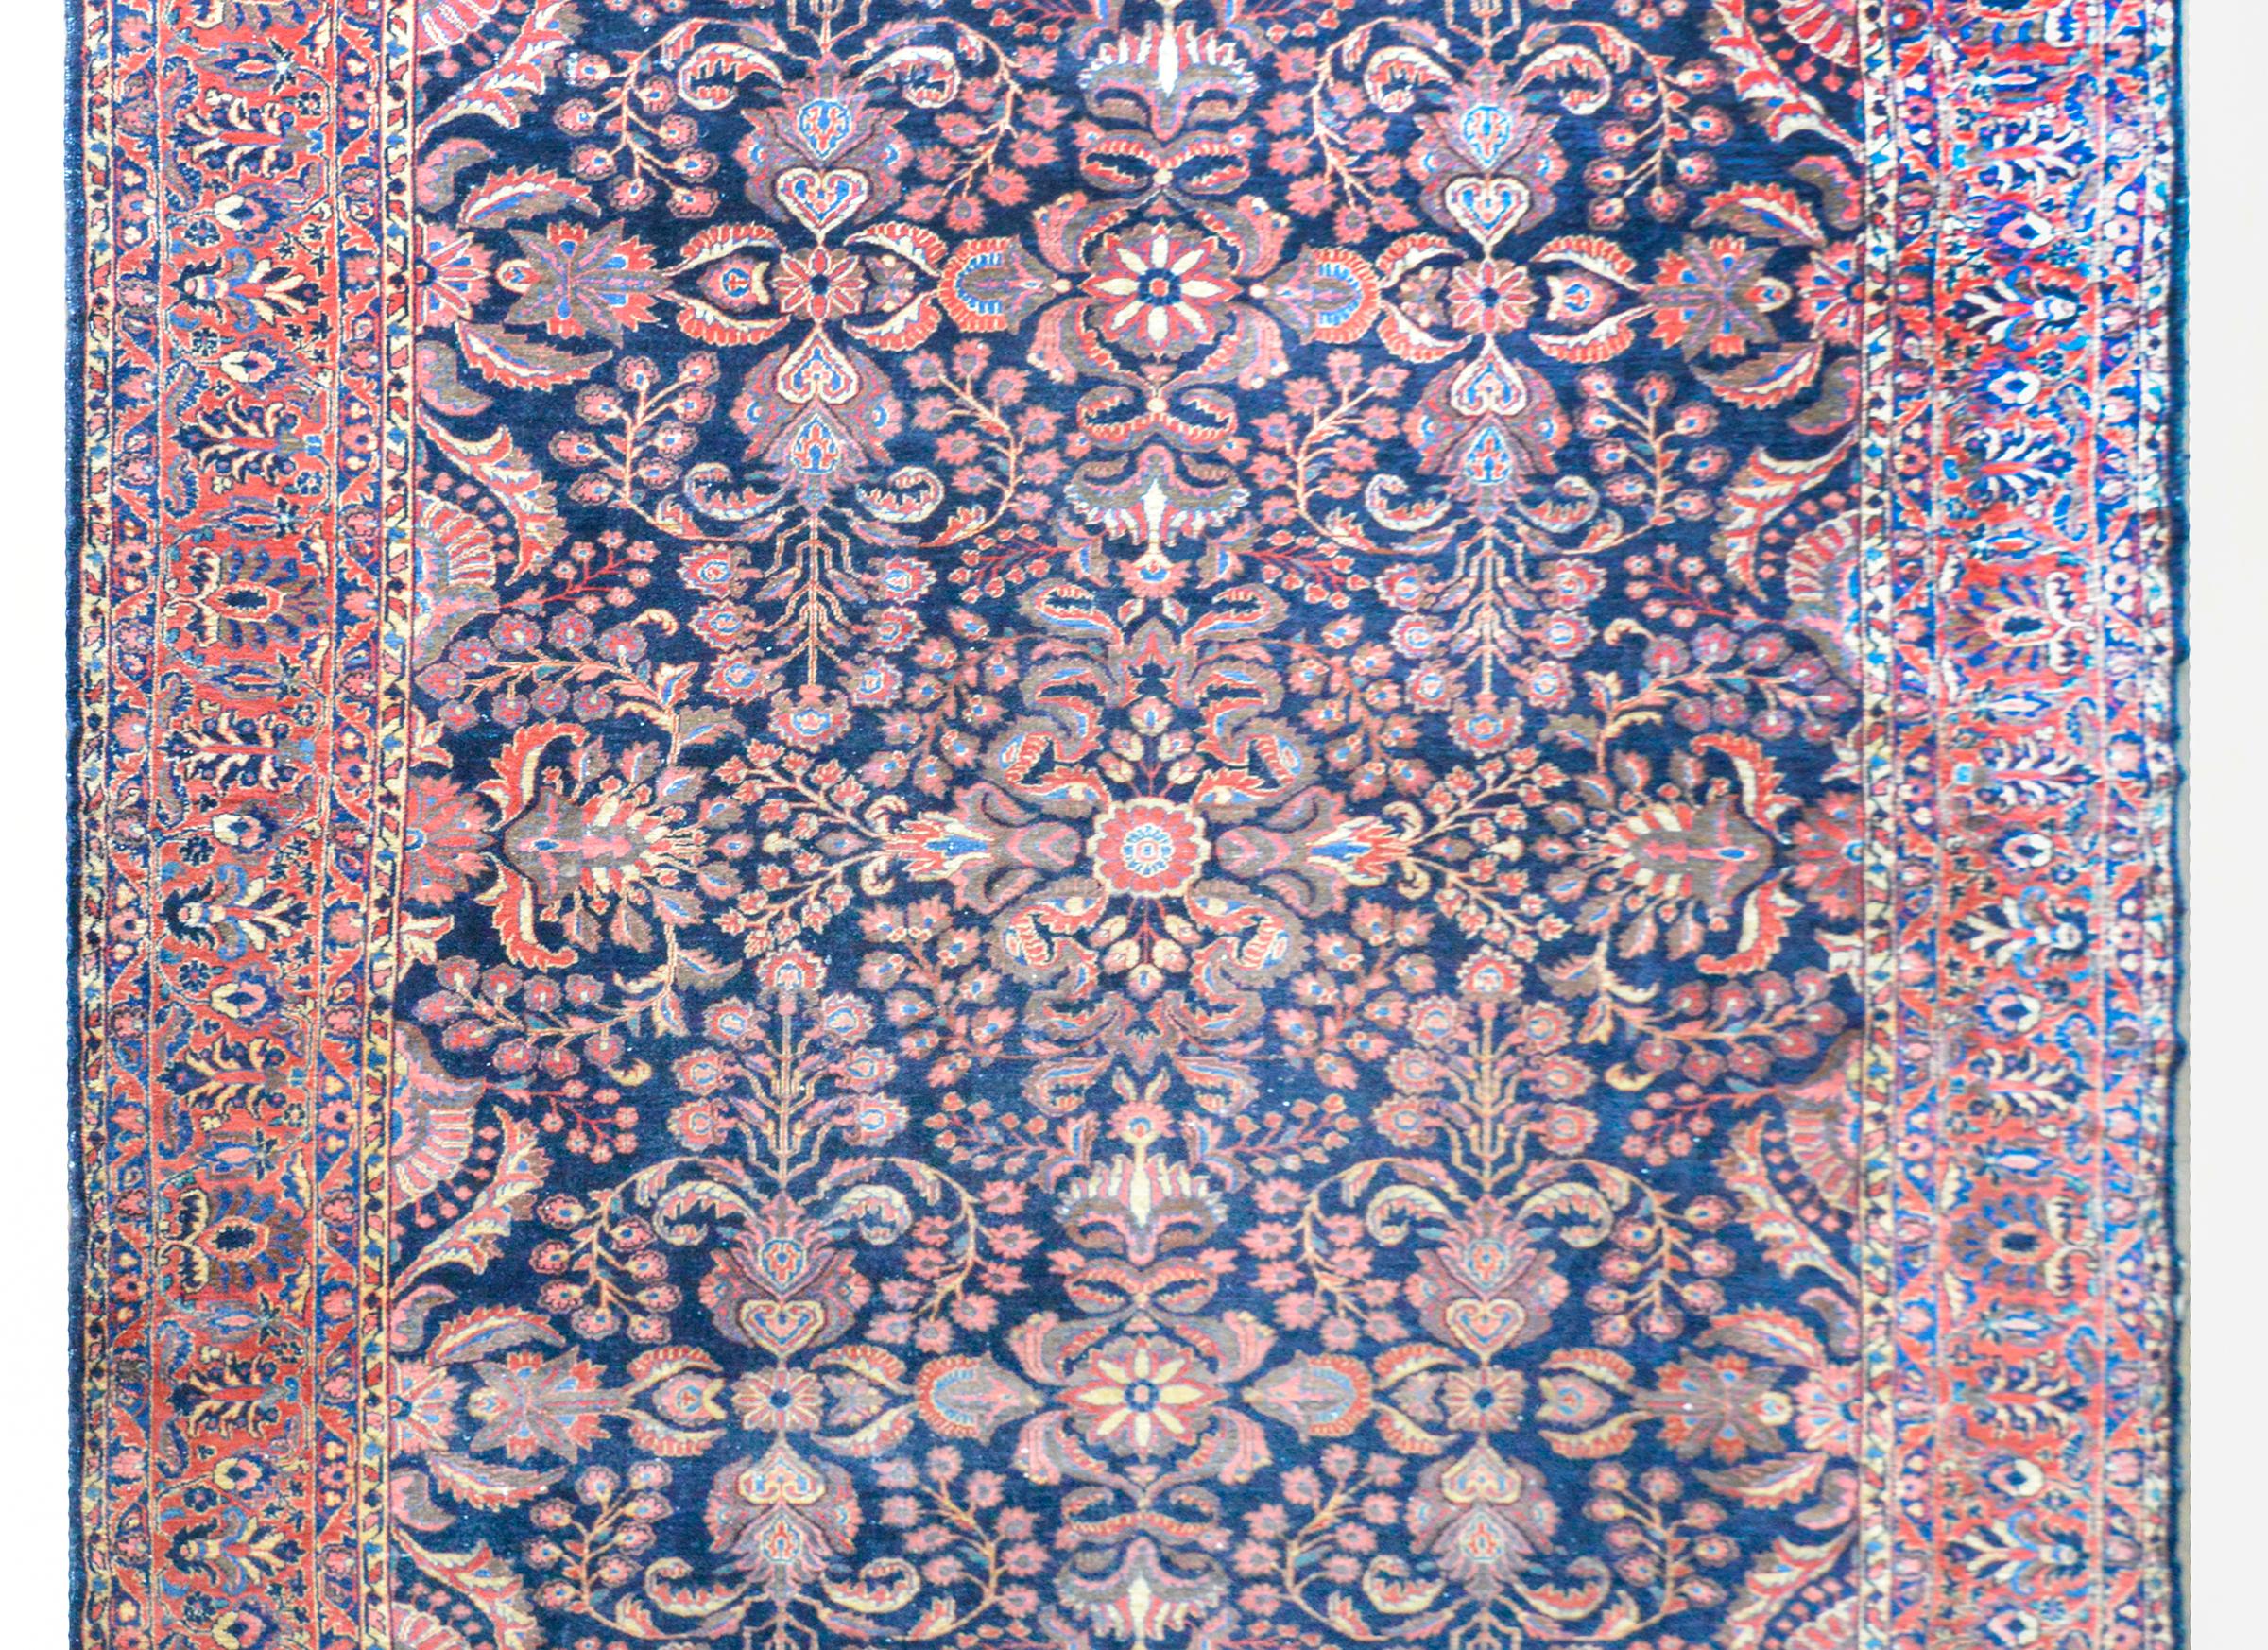 An incredible early 20th century Persian Lilian rug with a beautiful all-over mirrored floral pattern woven in traditional Lilihan colors of light and dark indigo, crimson, cream, and pink. The border is outstanding with a wide central floral